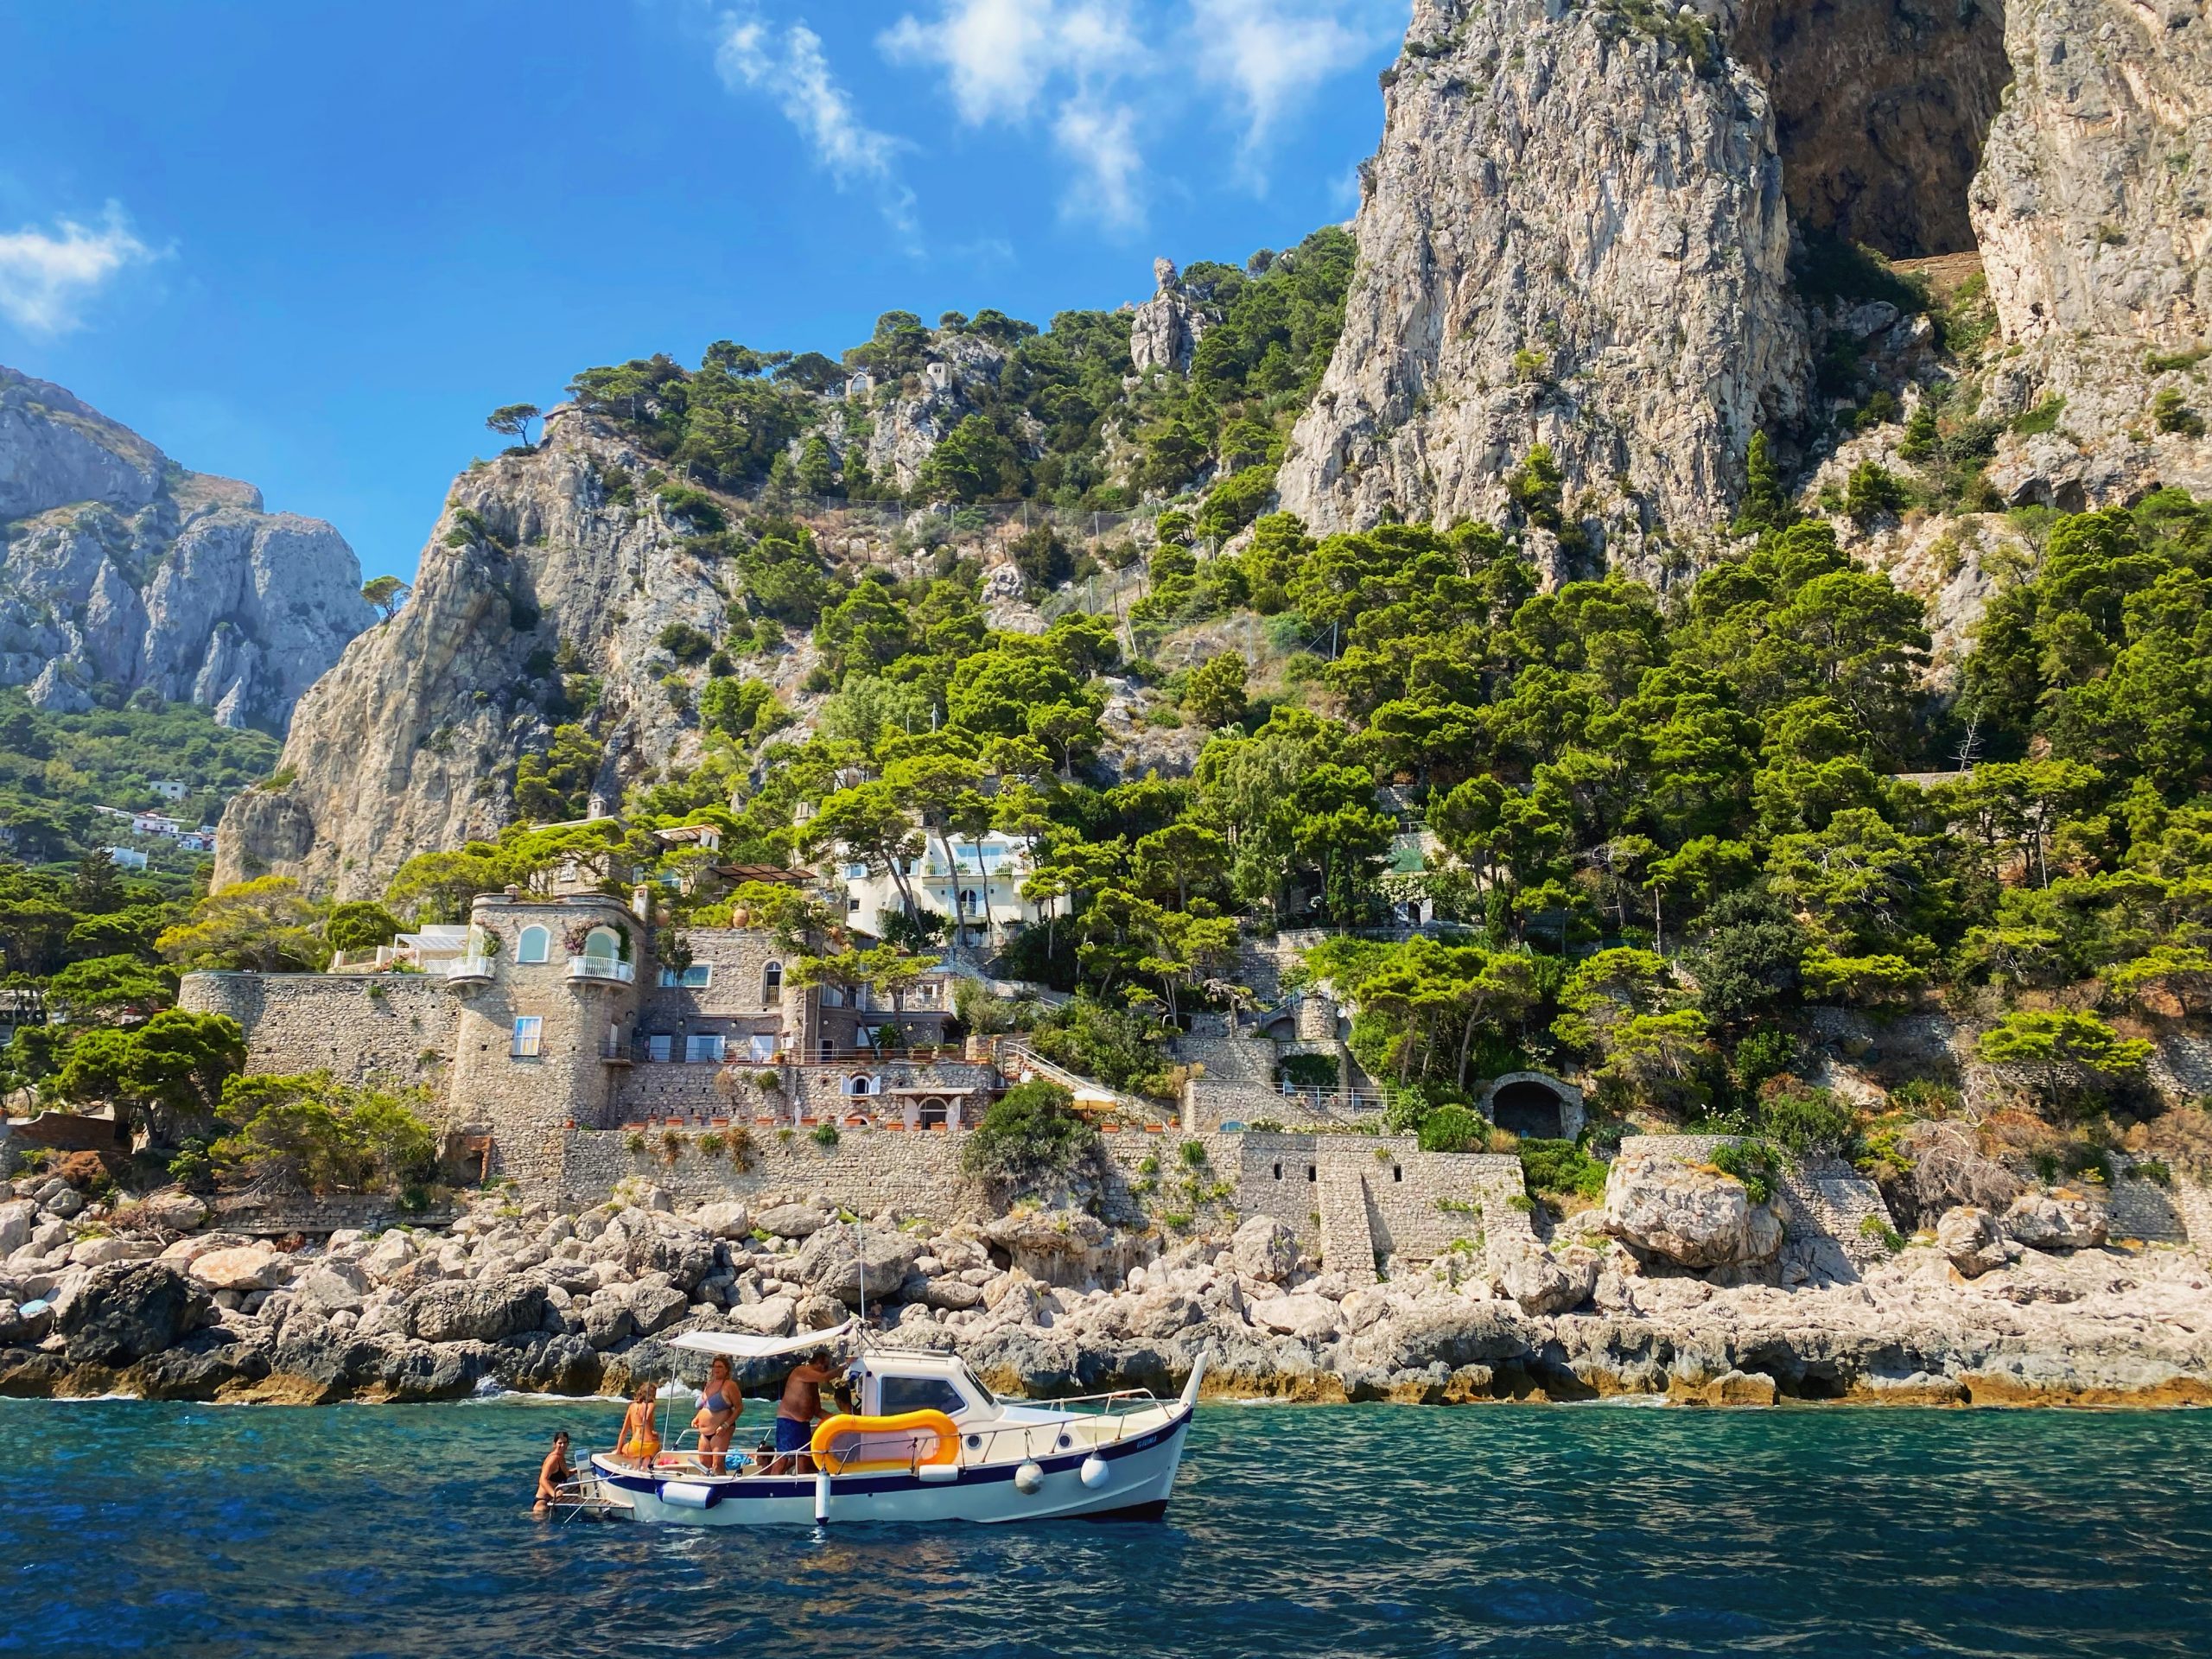 Capri Island, Italy - 15 Unforgettable Things To Do in Capri